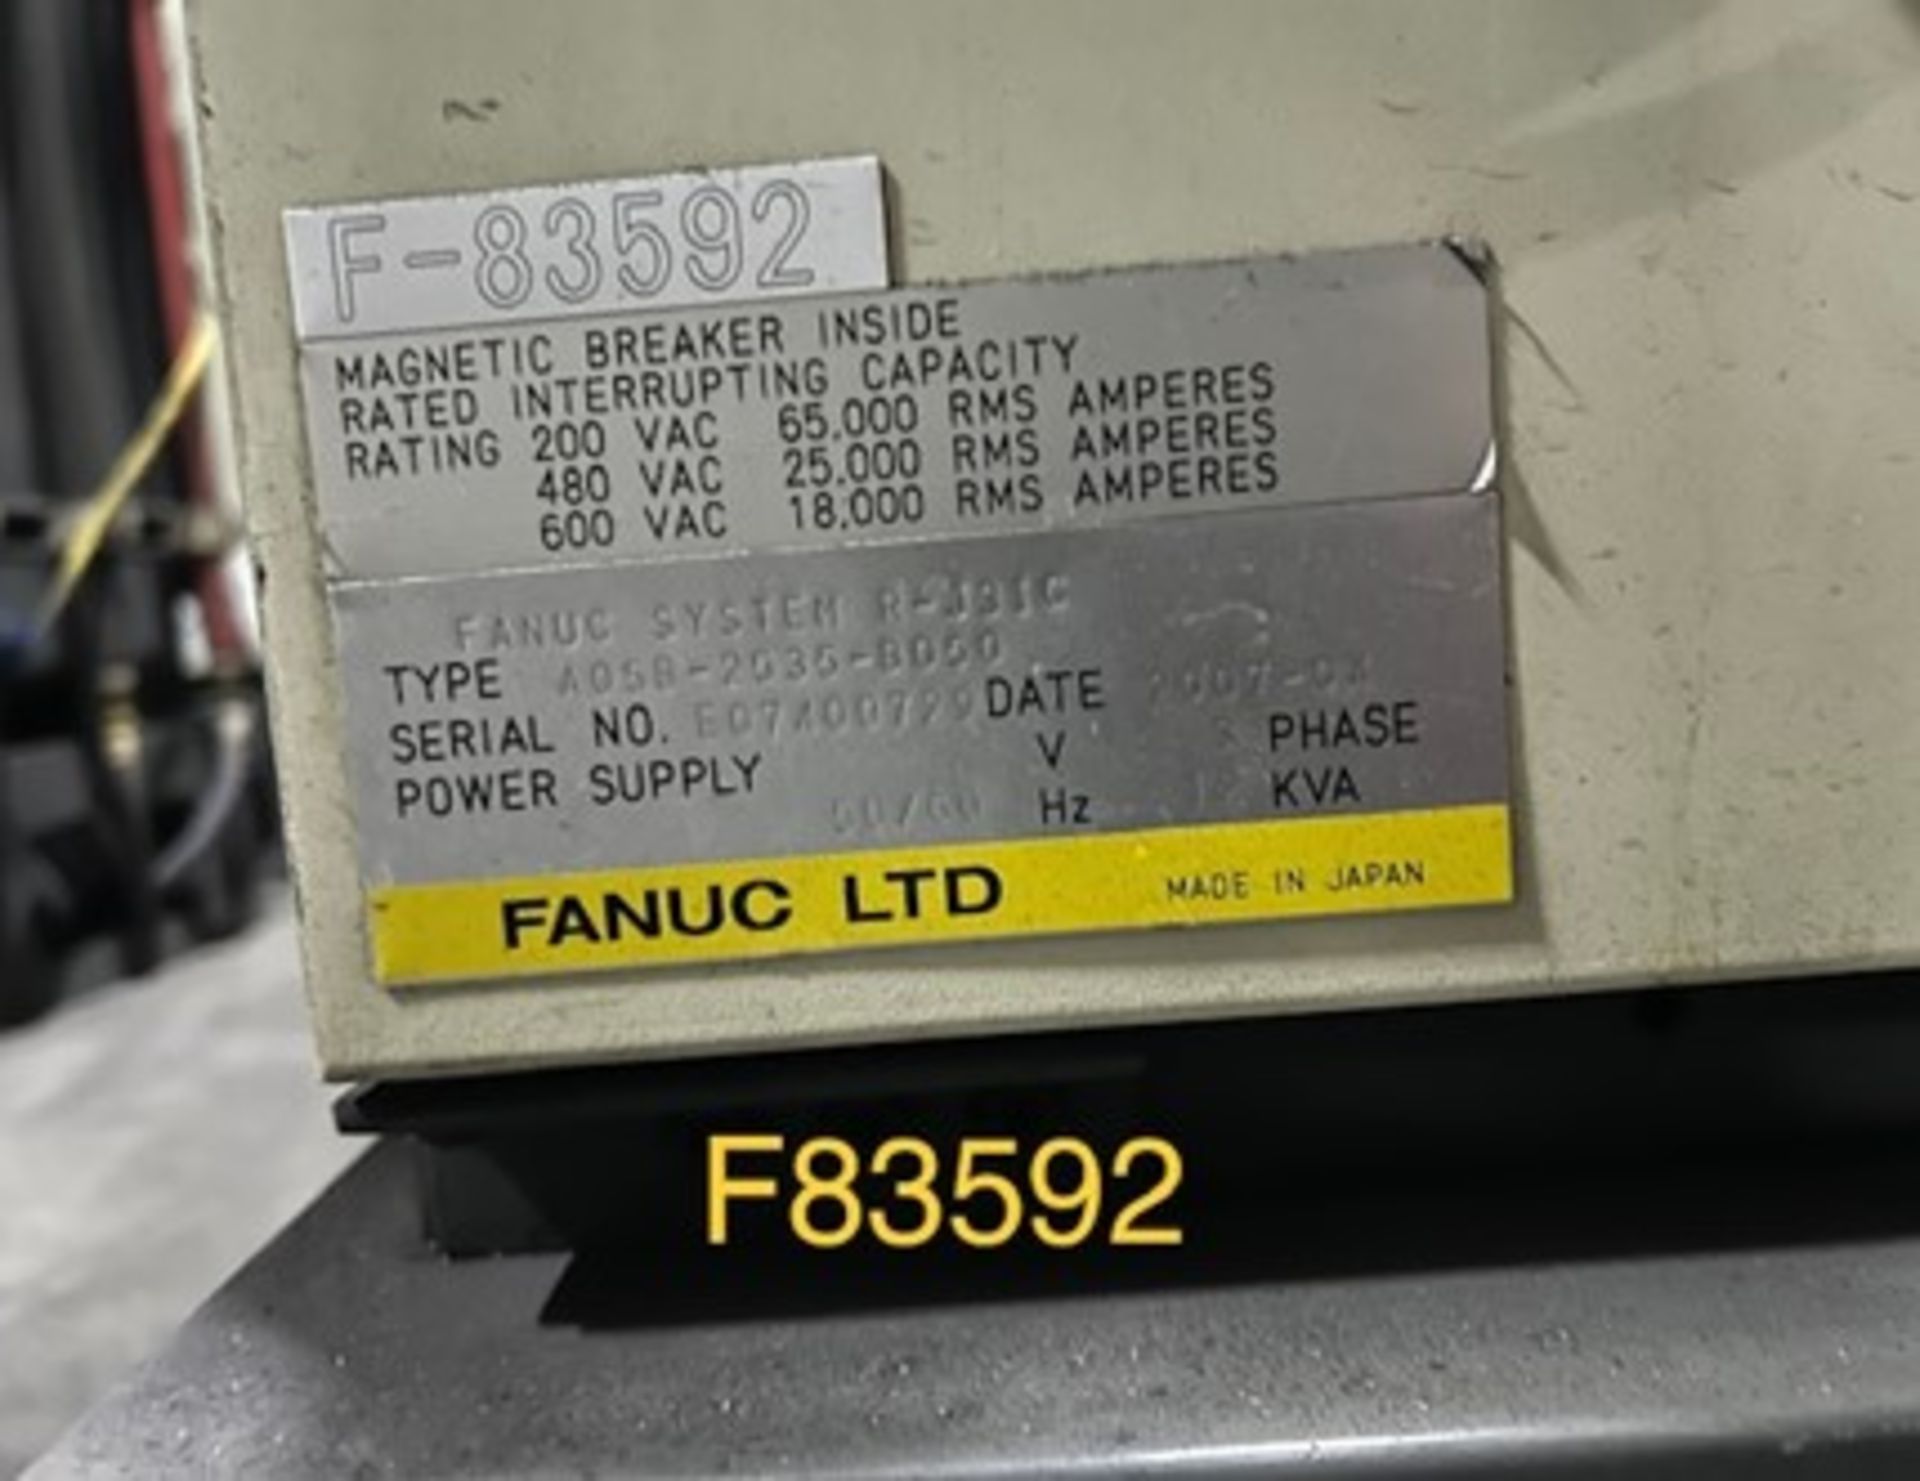 FANUC ROBOT R2000IB/210F WITH R-J3IC CONTROLS, CABLES AND TEACH PENDANT, YEAR 2007, SN F83592 - Image 3 of 3